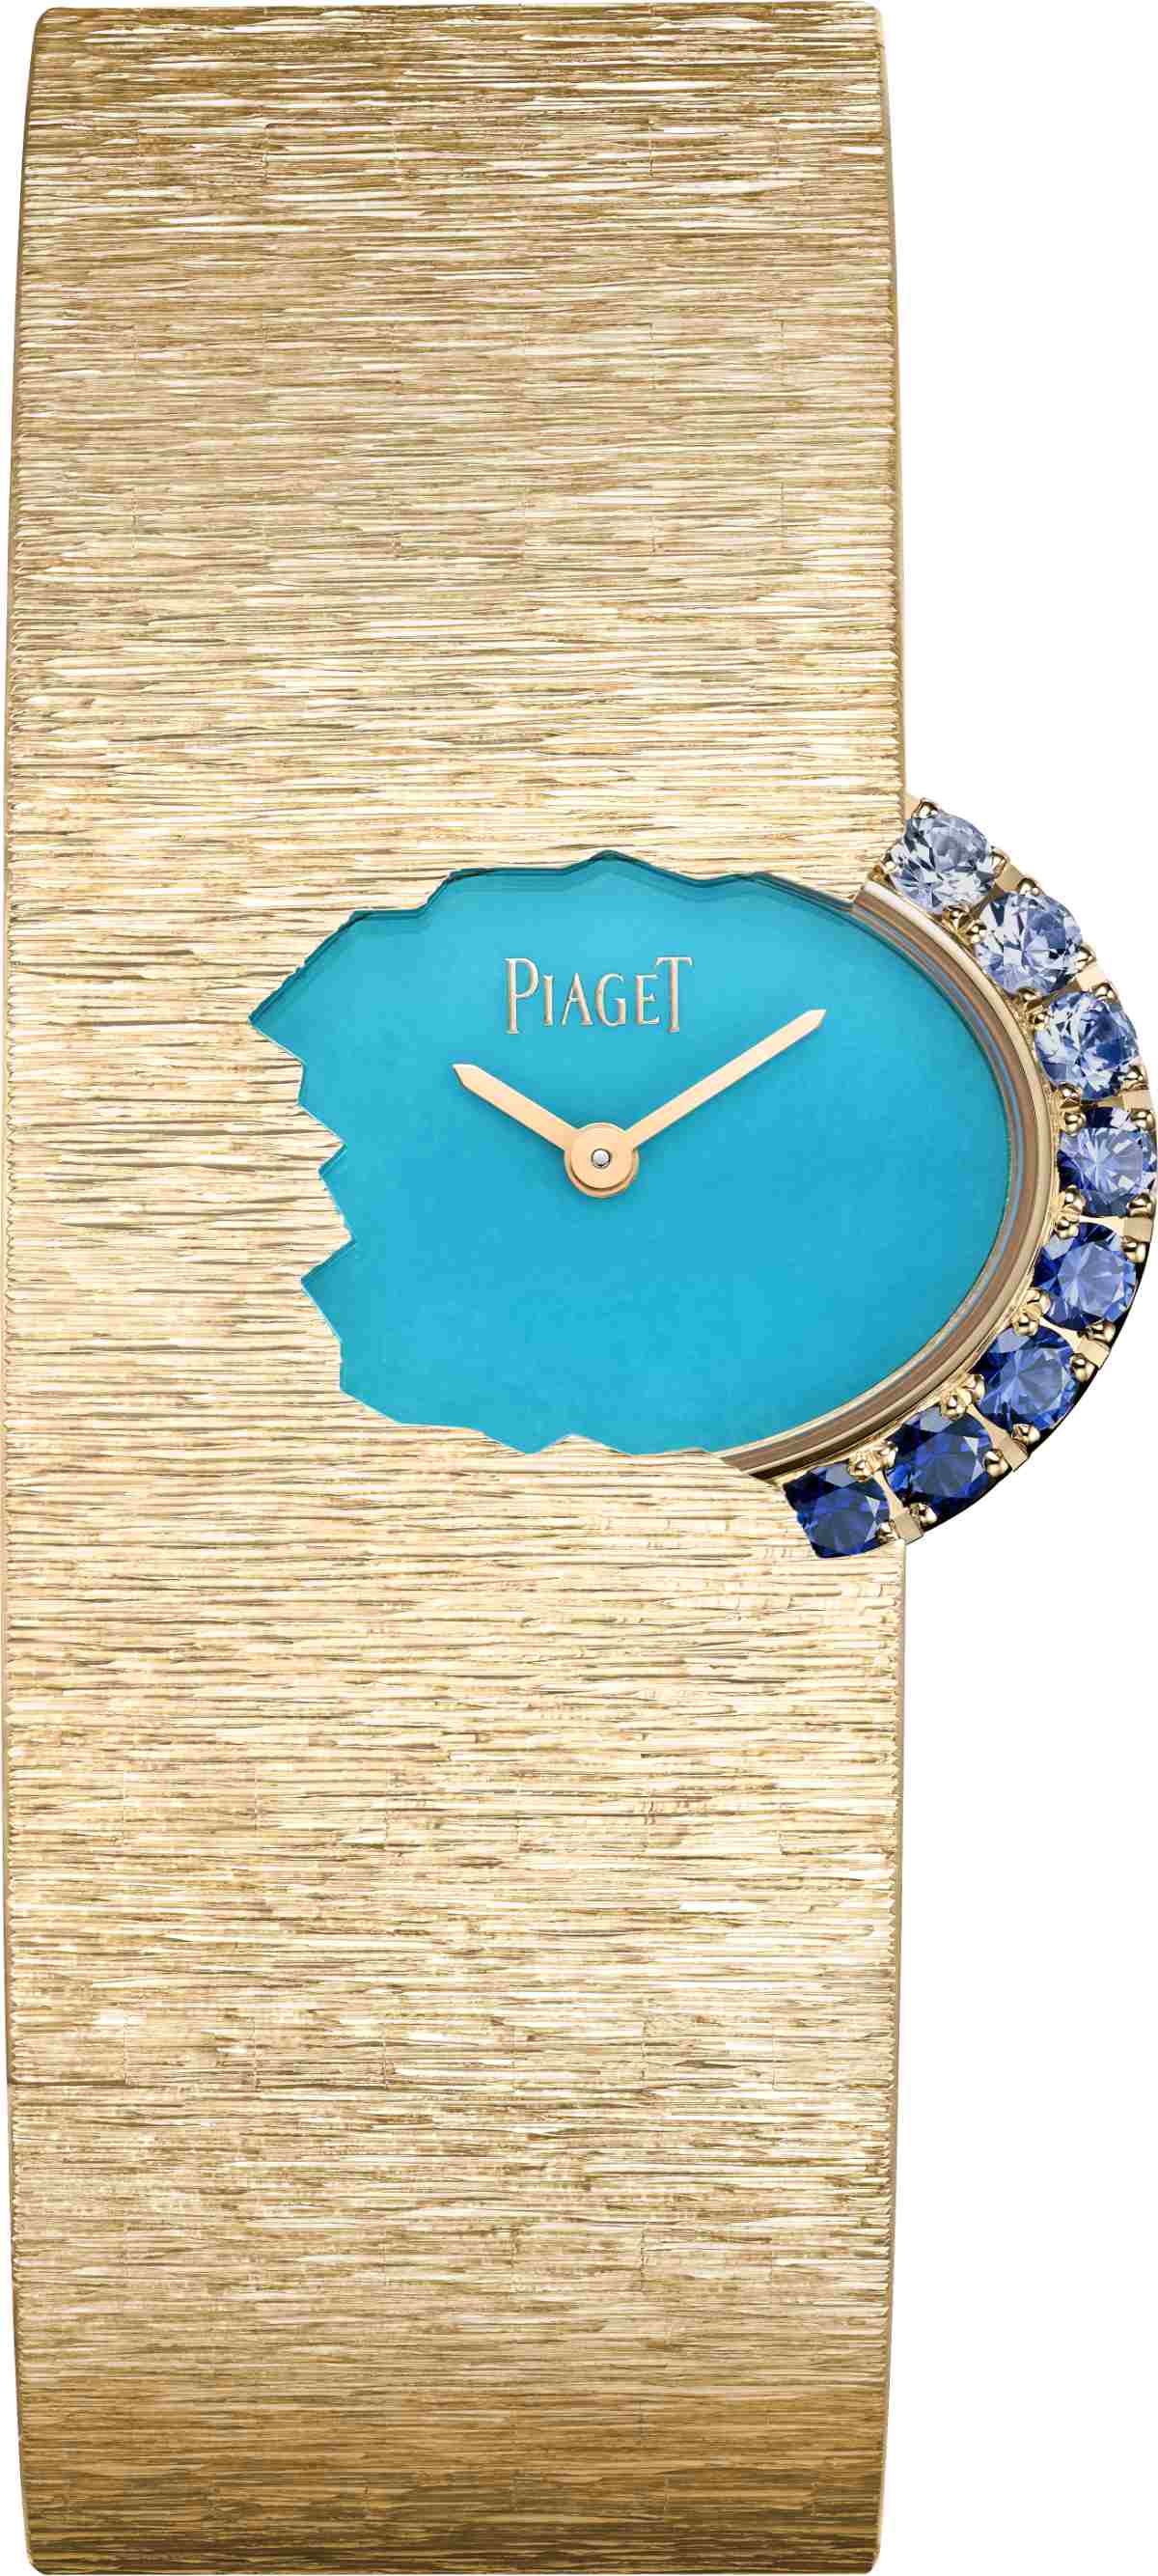 Hidden Treasure - Piaget’s Cuff Watch Awarded By The GPHG